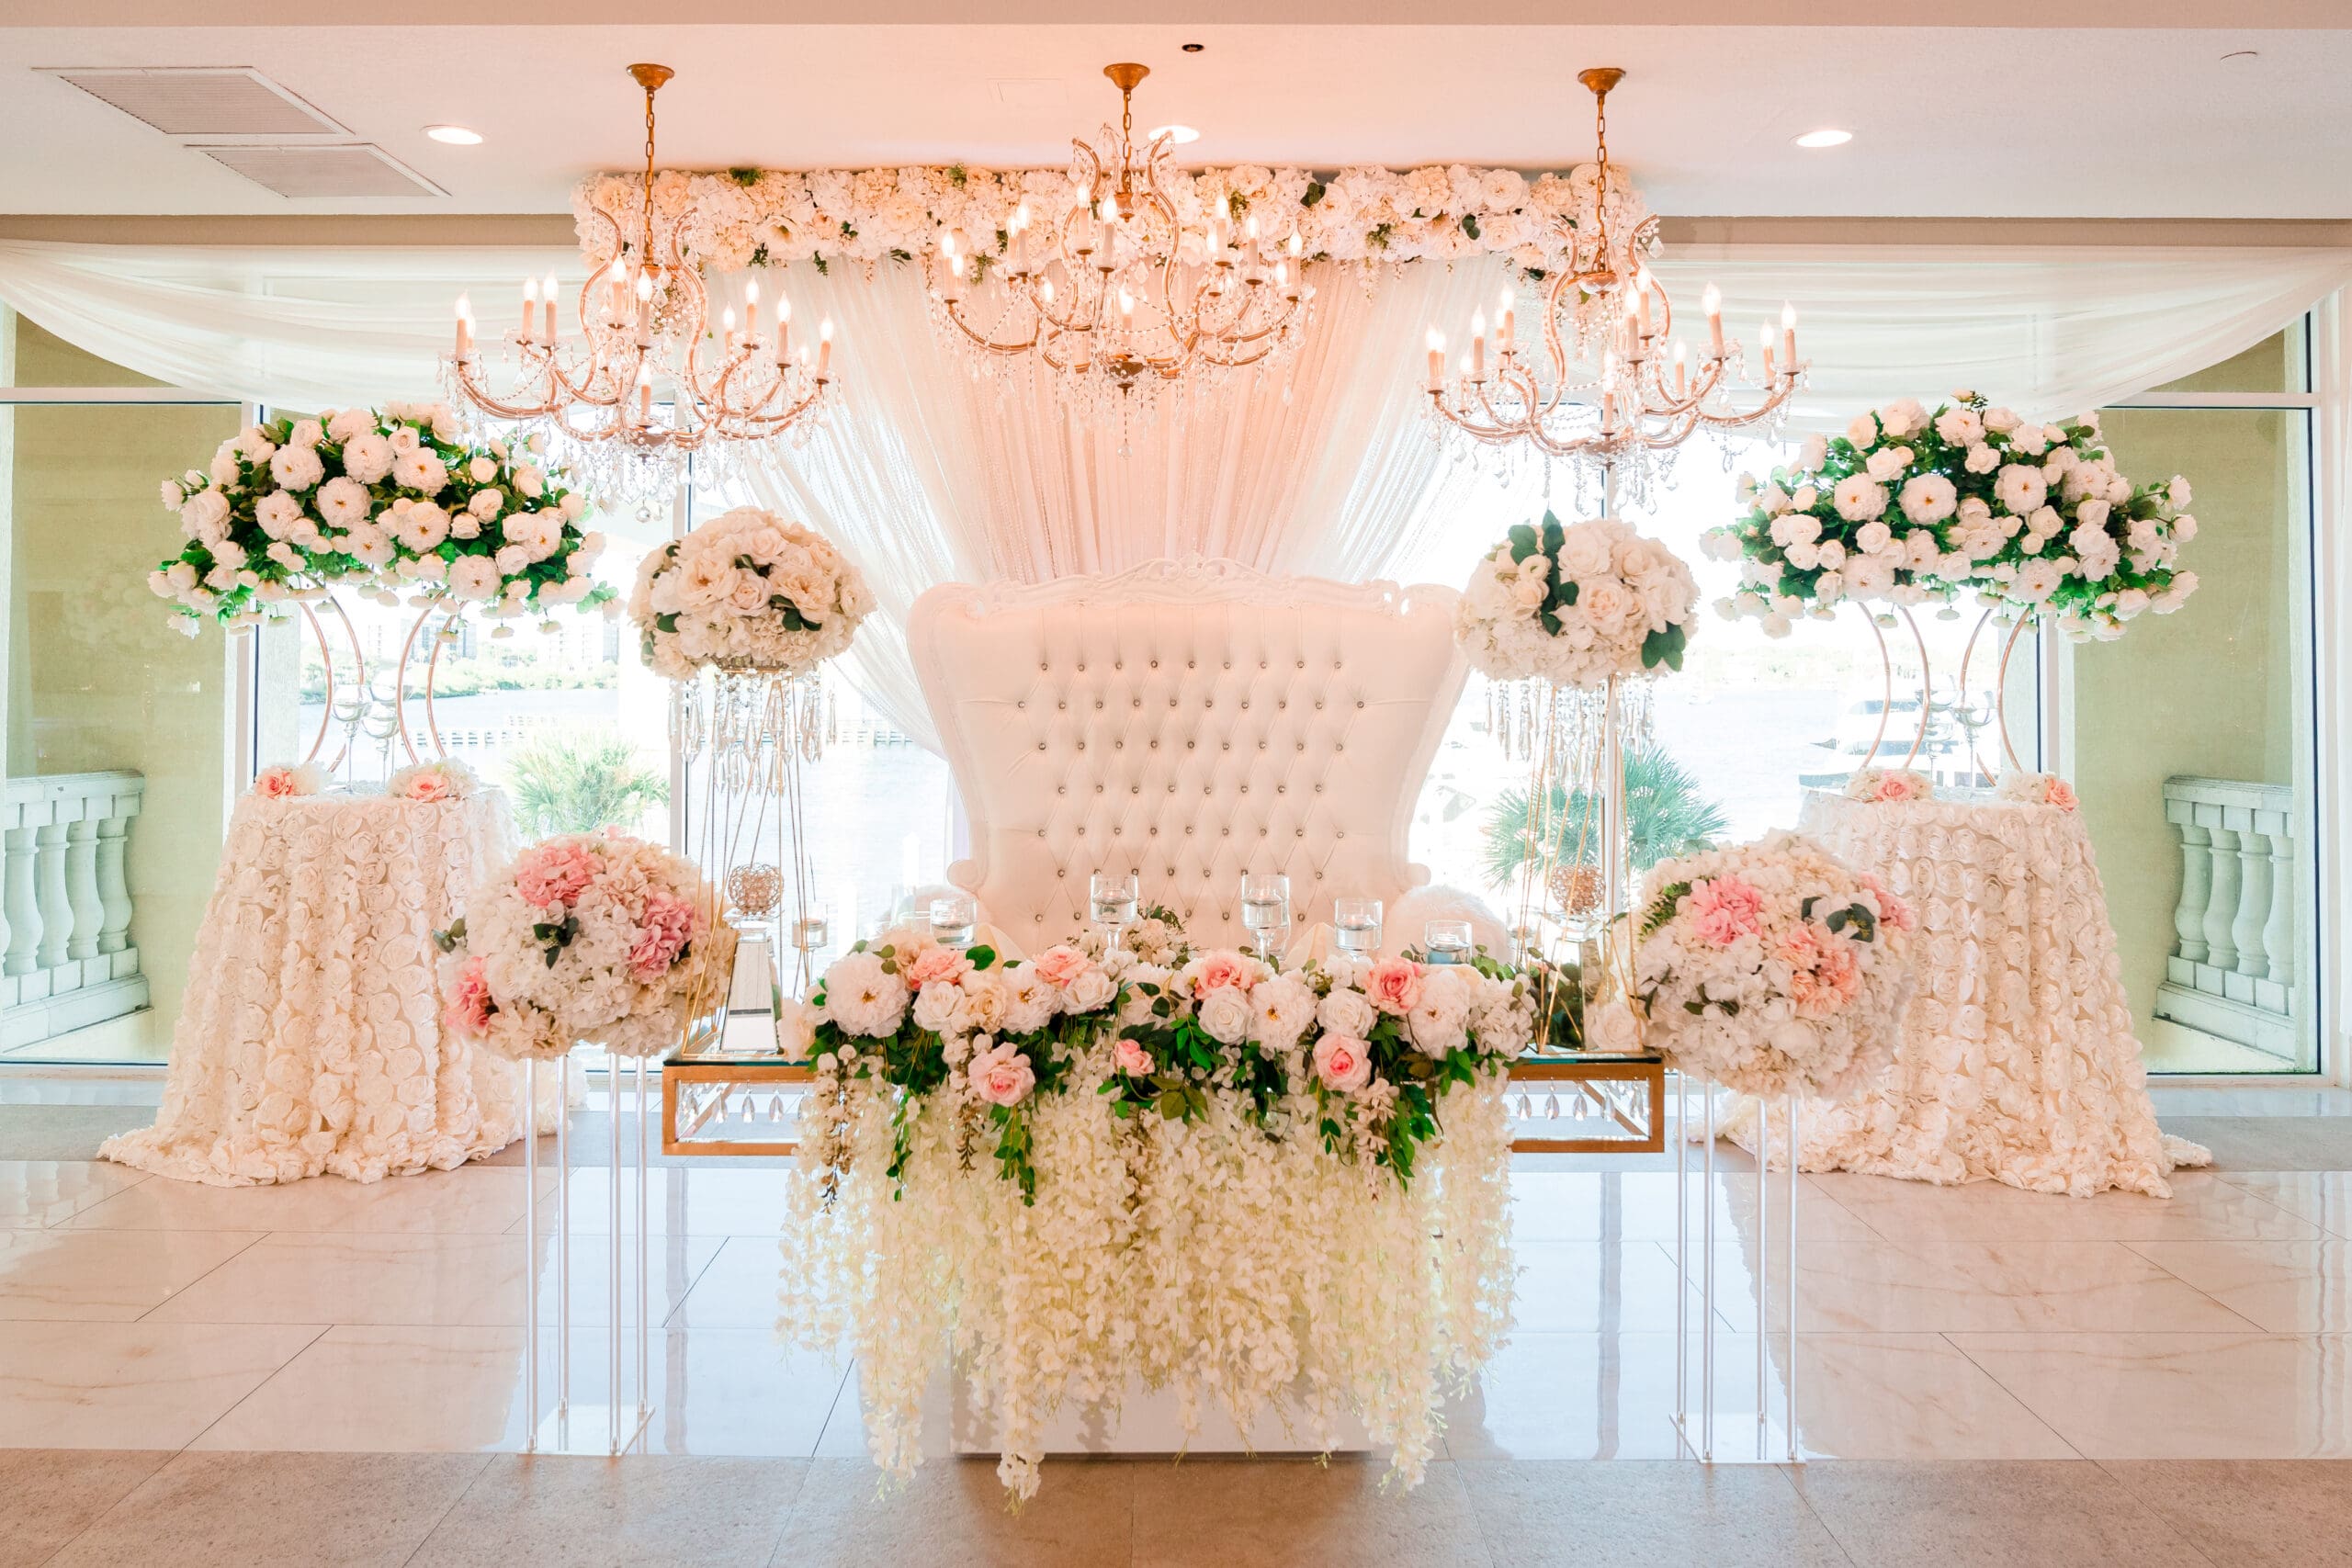 Jazer and Jen seated at a lavishly decorated table in the Crystal Ballroom reception area, adorned with white and pink rose bouquets, draped with white fabric, and featuring a white love seat.